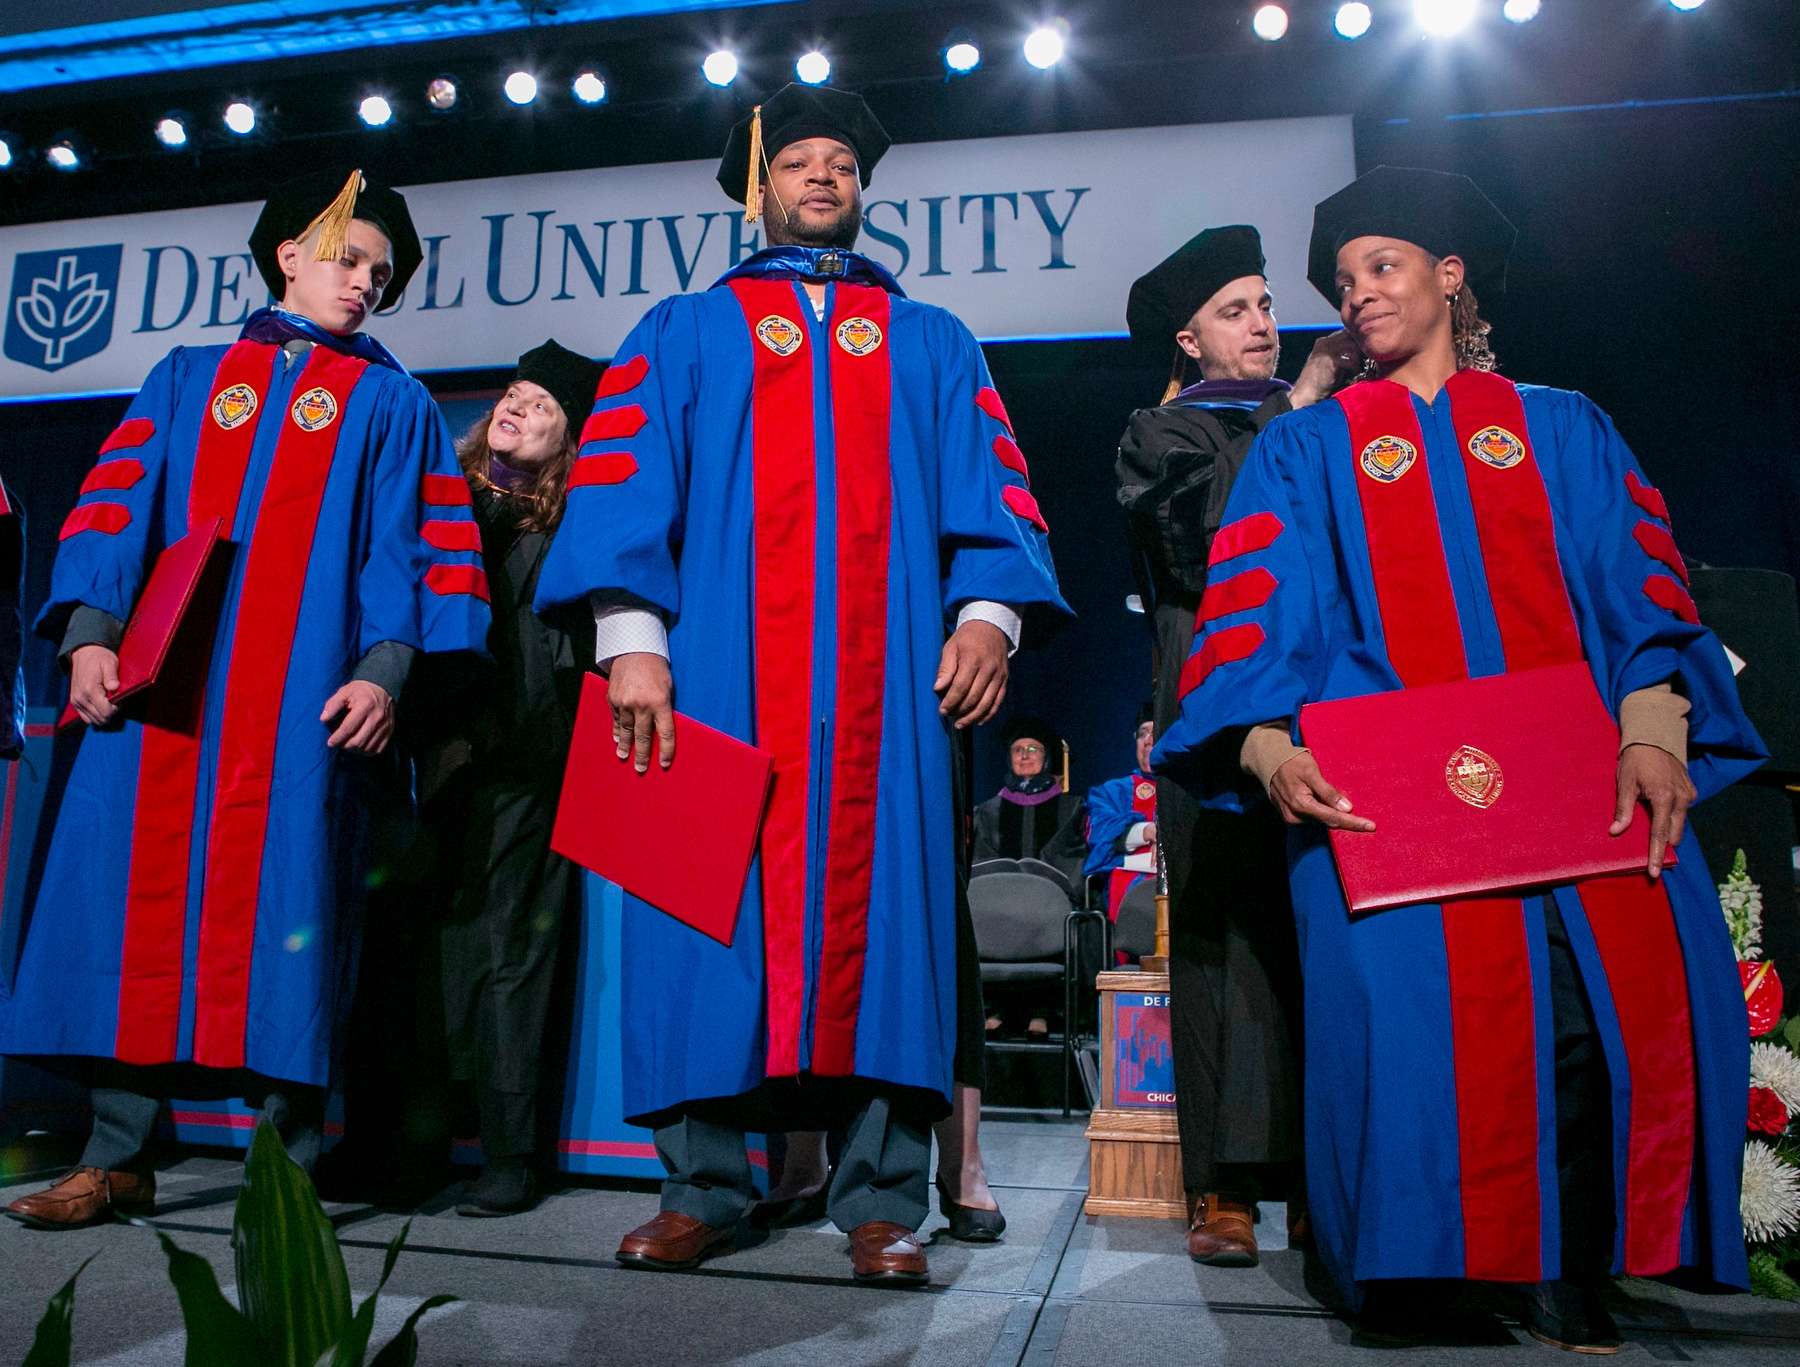 2018 College of Law Commencement Multimedia DePaul University